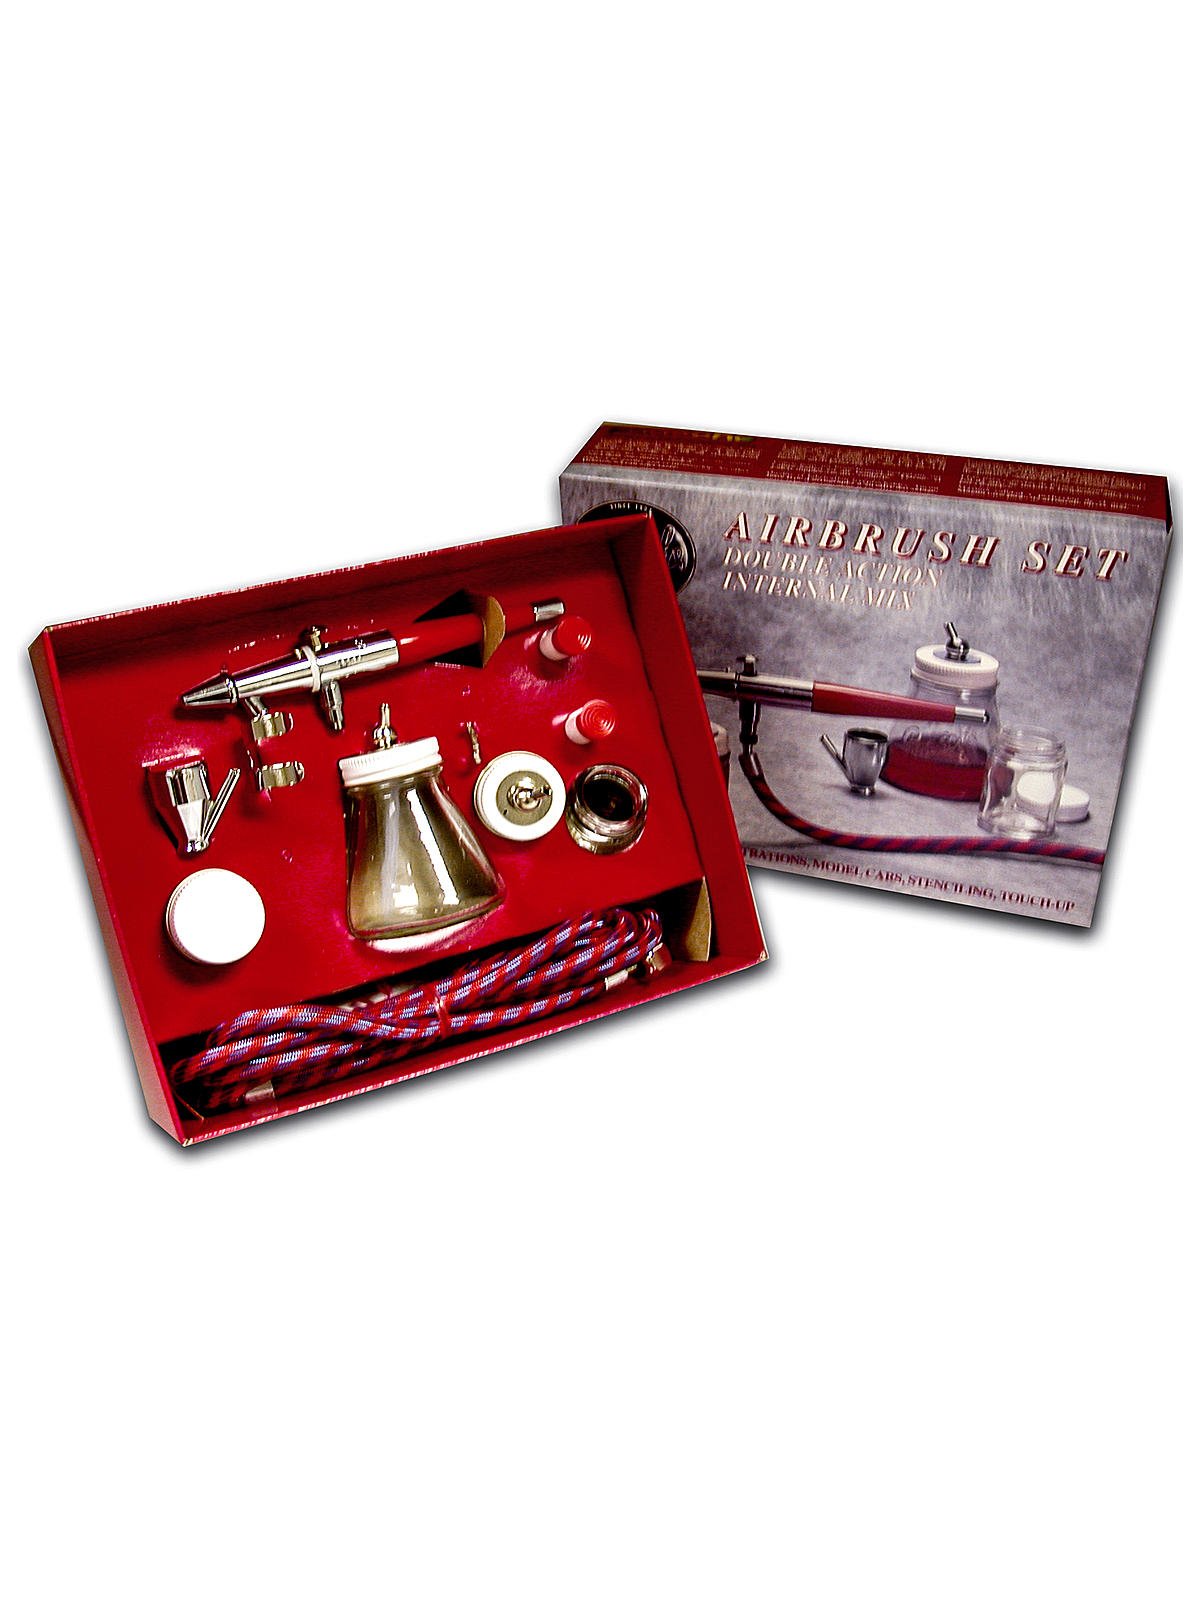 Professional Automotive Touch Up Airbrush Kit